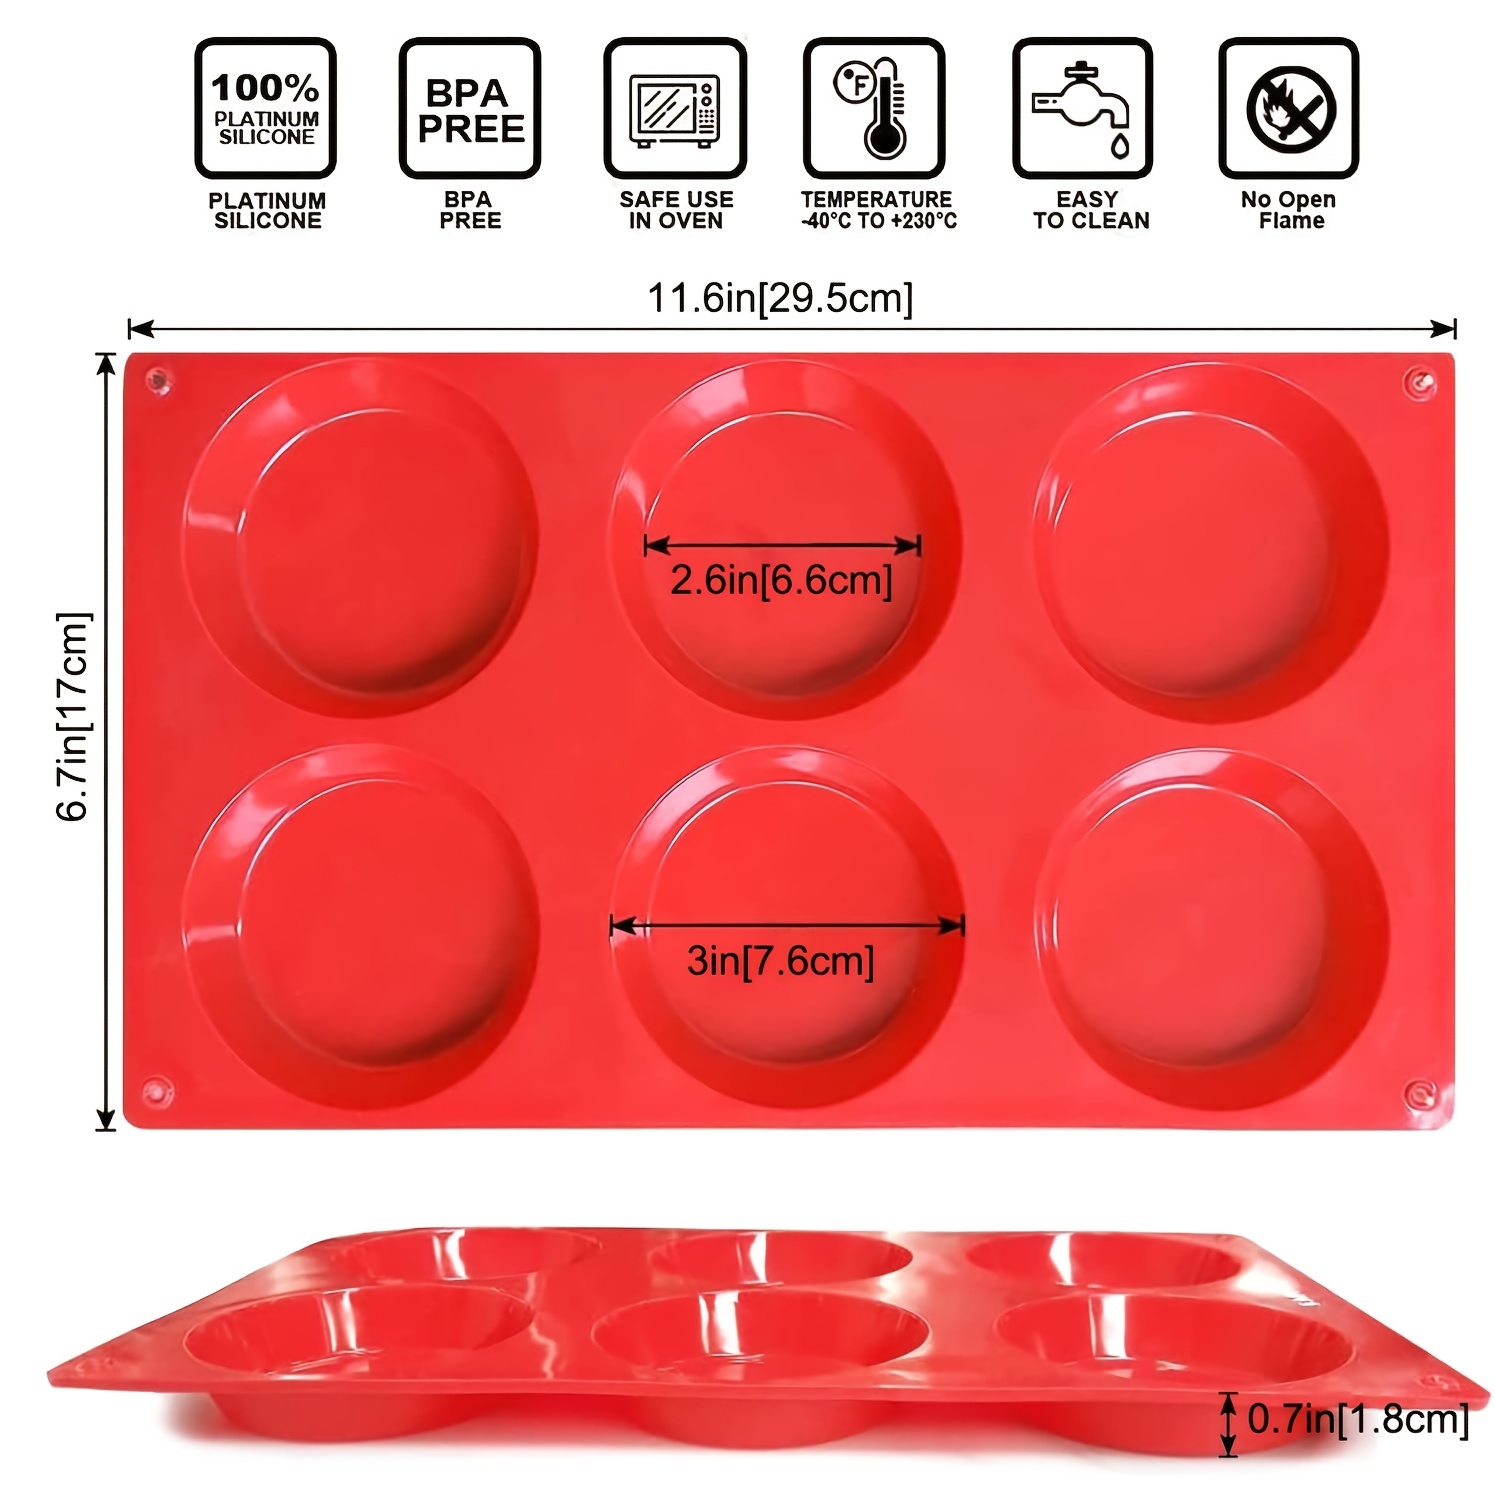 6-Cavity Silicone Whoopie Pie Baking Pan/Non-Stick 3 Round Muffin Top Pan/Mini  Tart Pan for Egg Cloud Bread Buns English Muffins Breakfast Sandwiches Mold